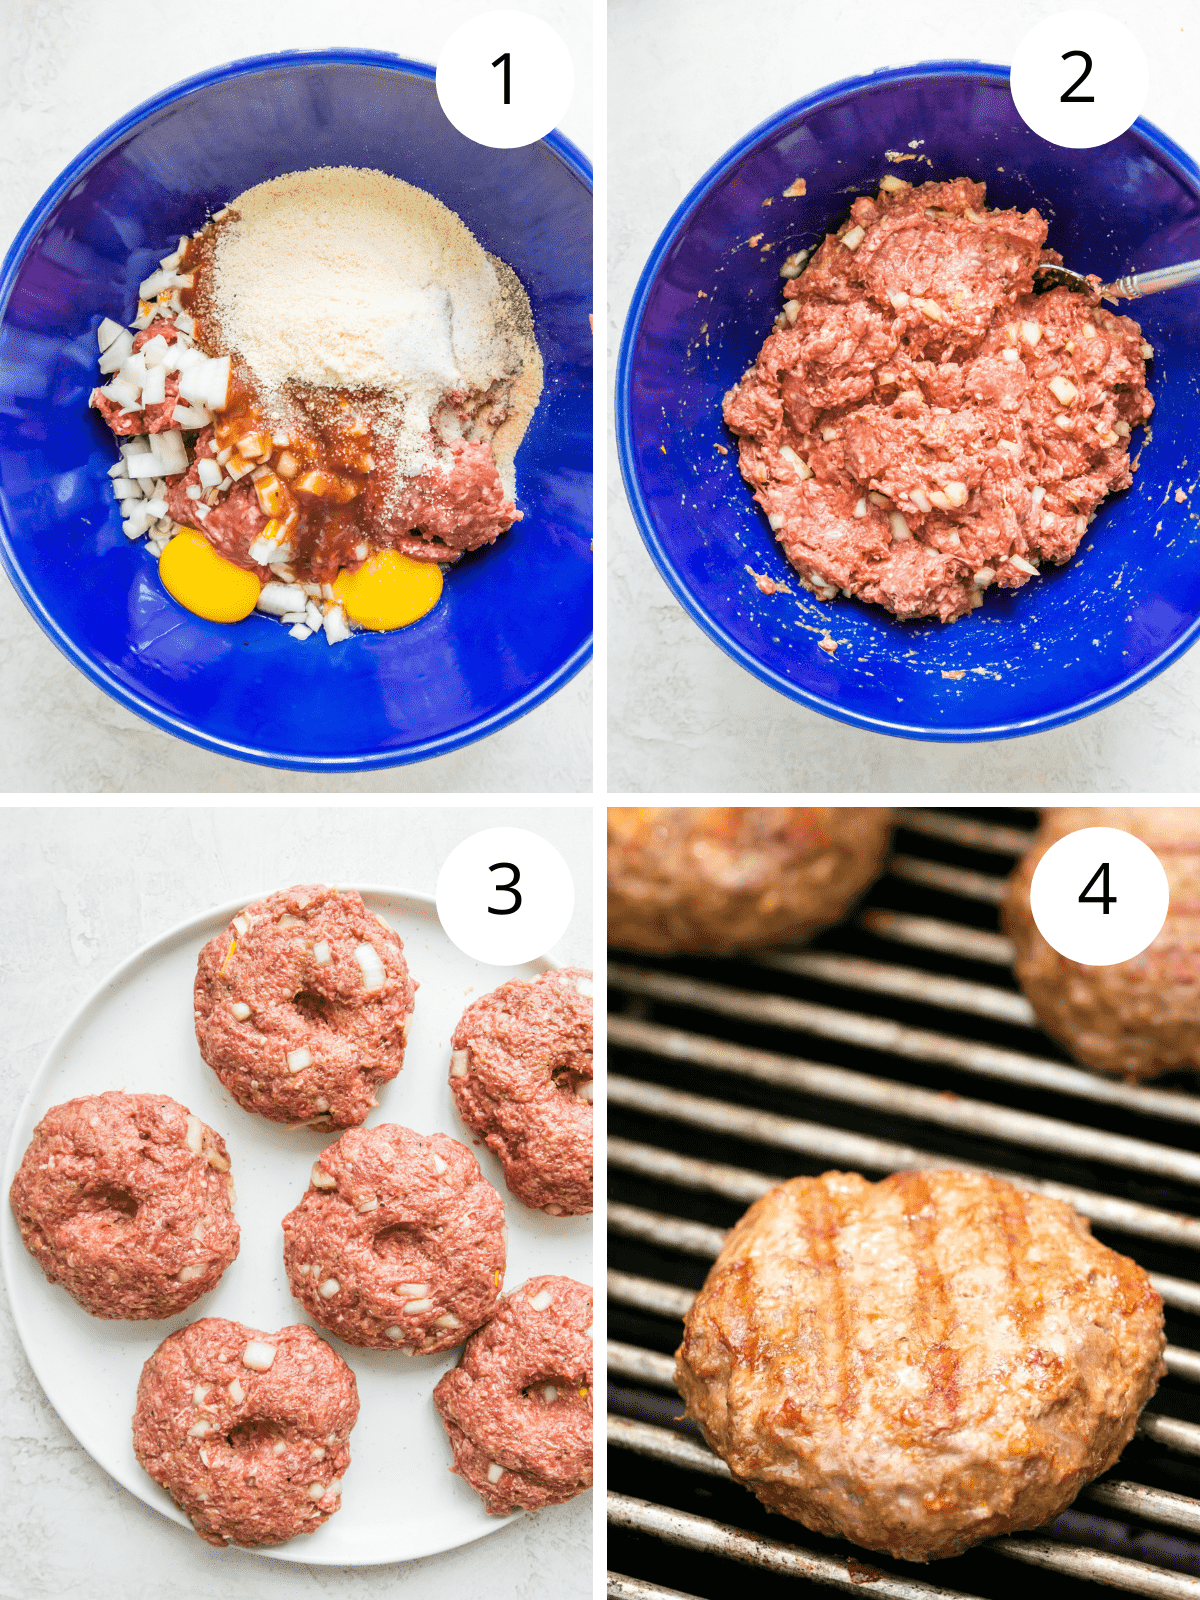 step by step directions for making gluten free burgers